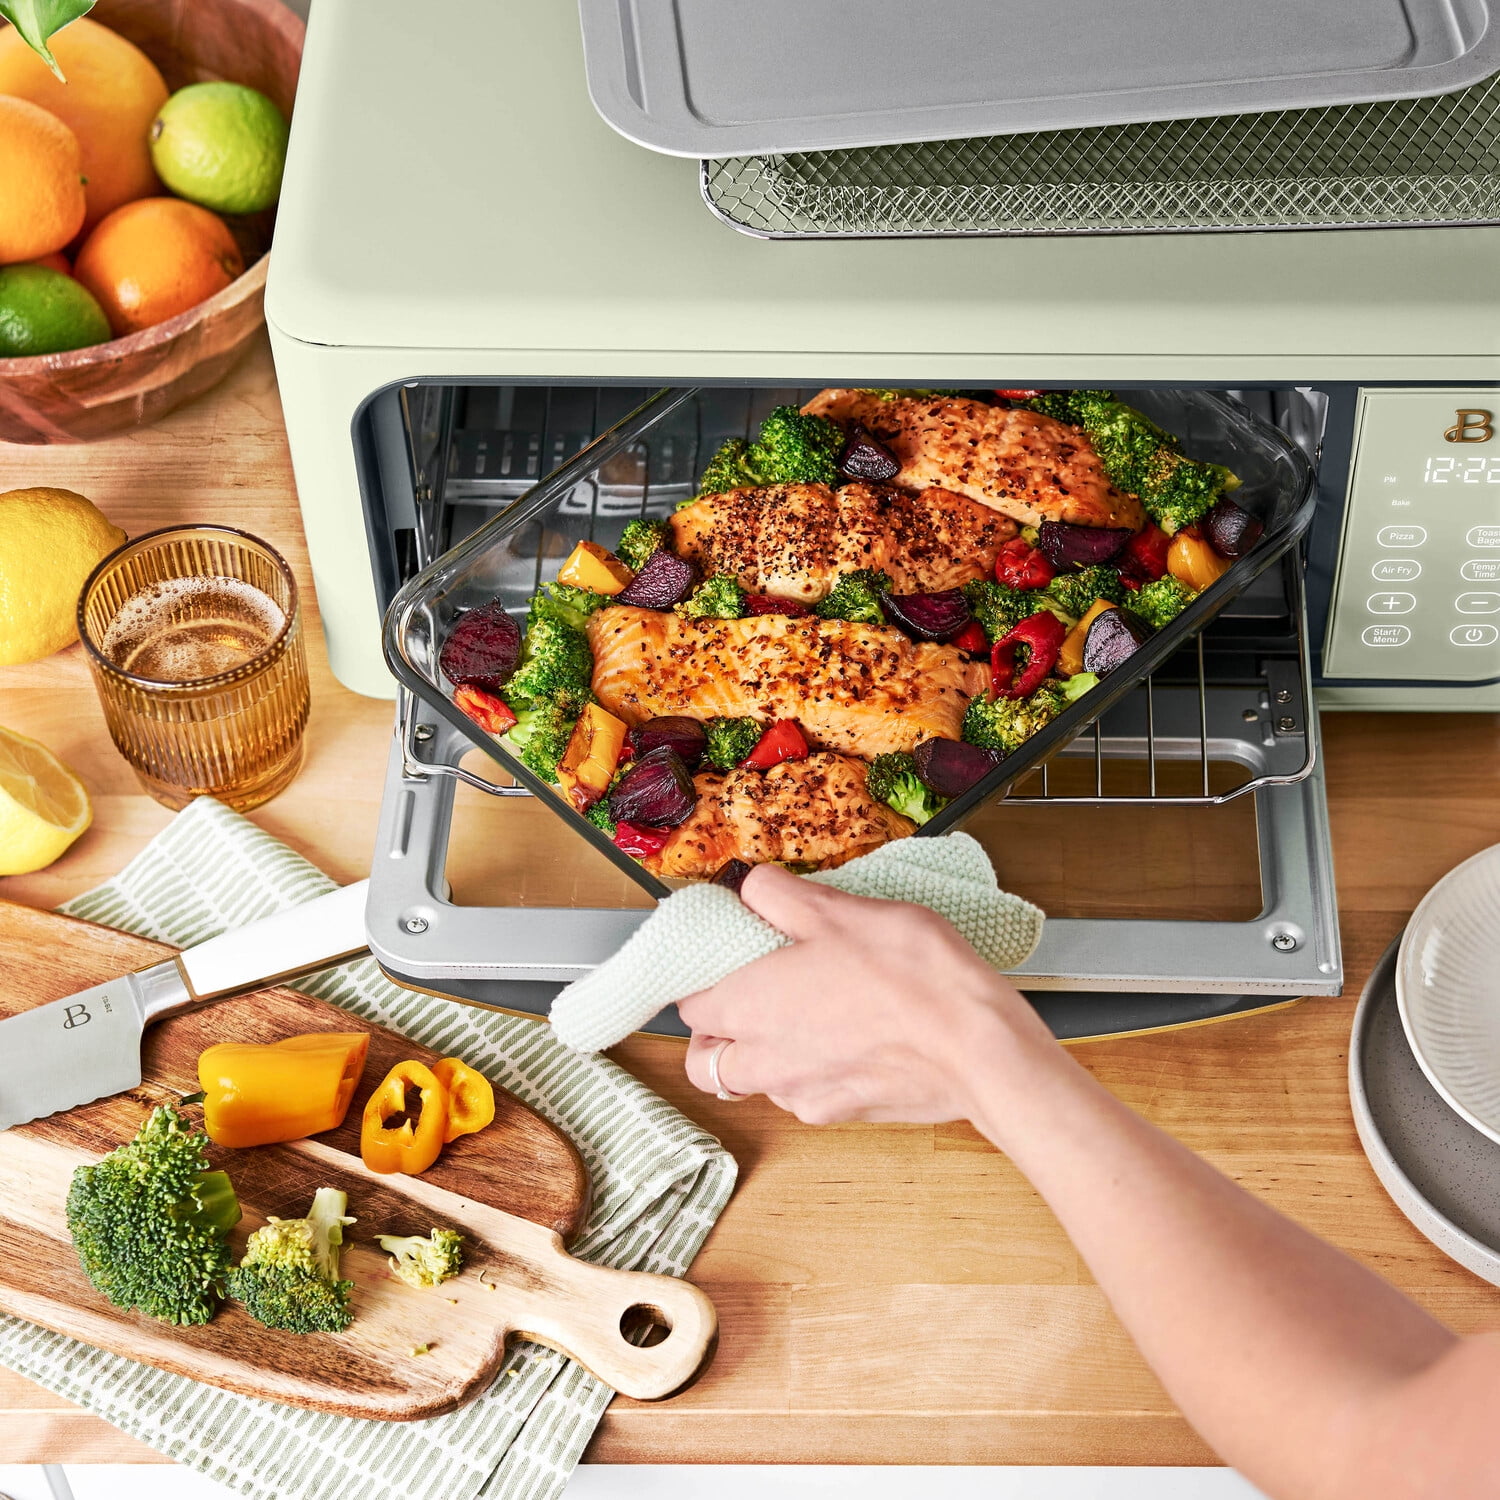 KBS 10-in-1 Toaster Oven with Rotisserie, 1700W Air Fryer Combo for  Dehydrate Bake Broil Roast Toast, for $160 - FM9010